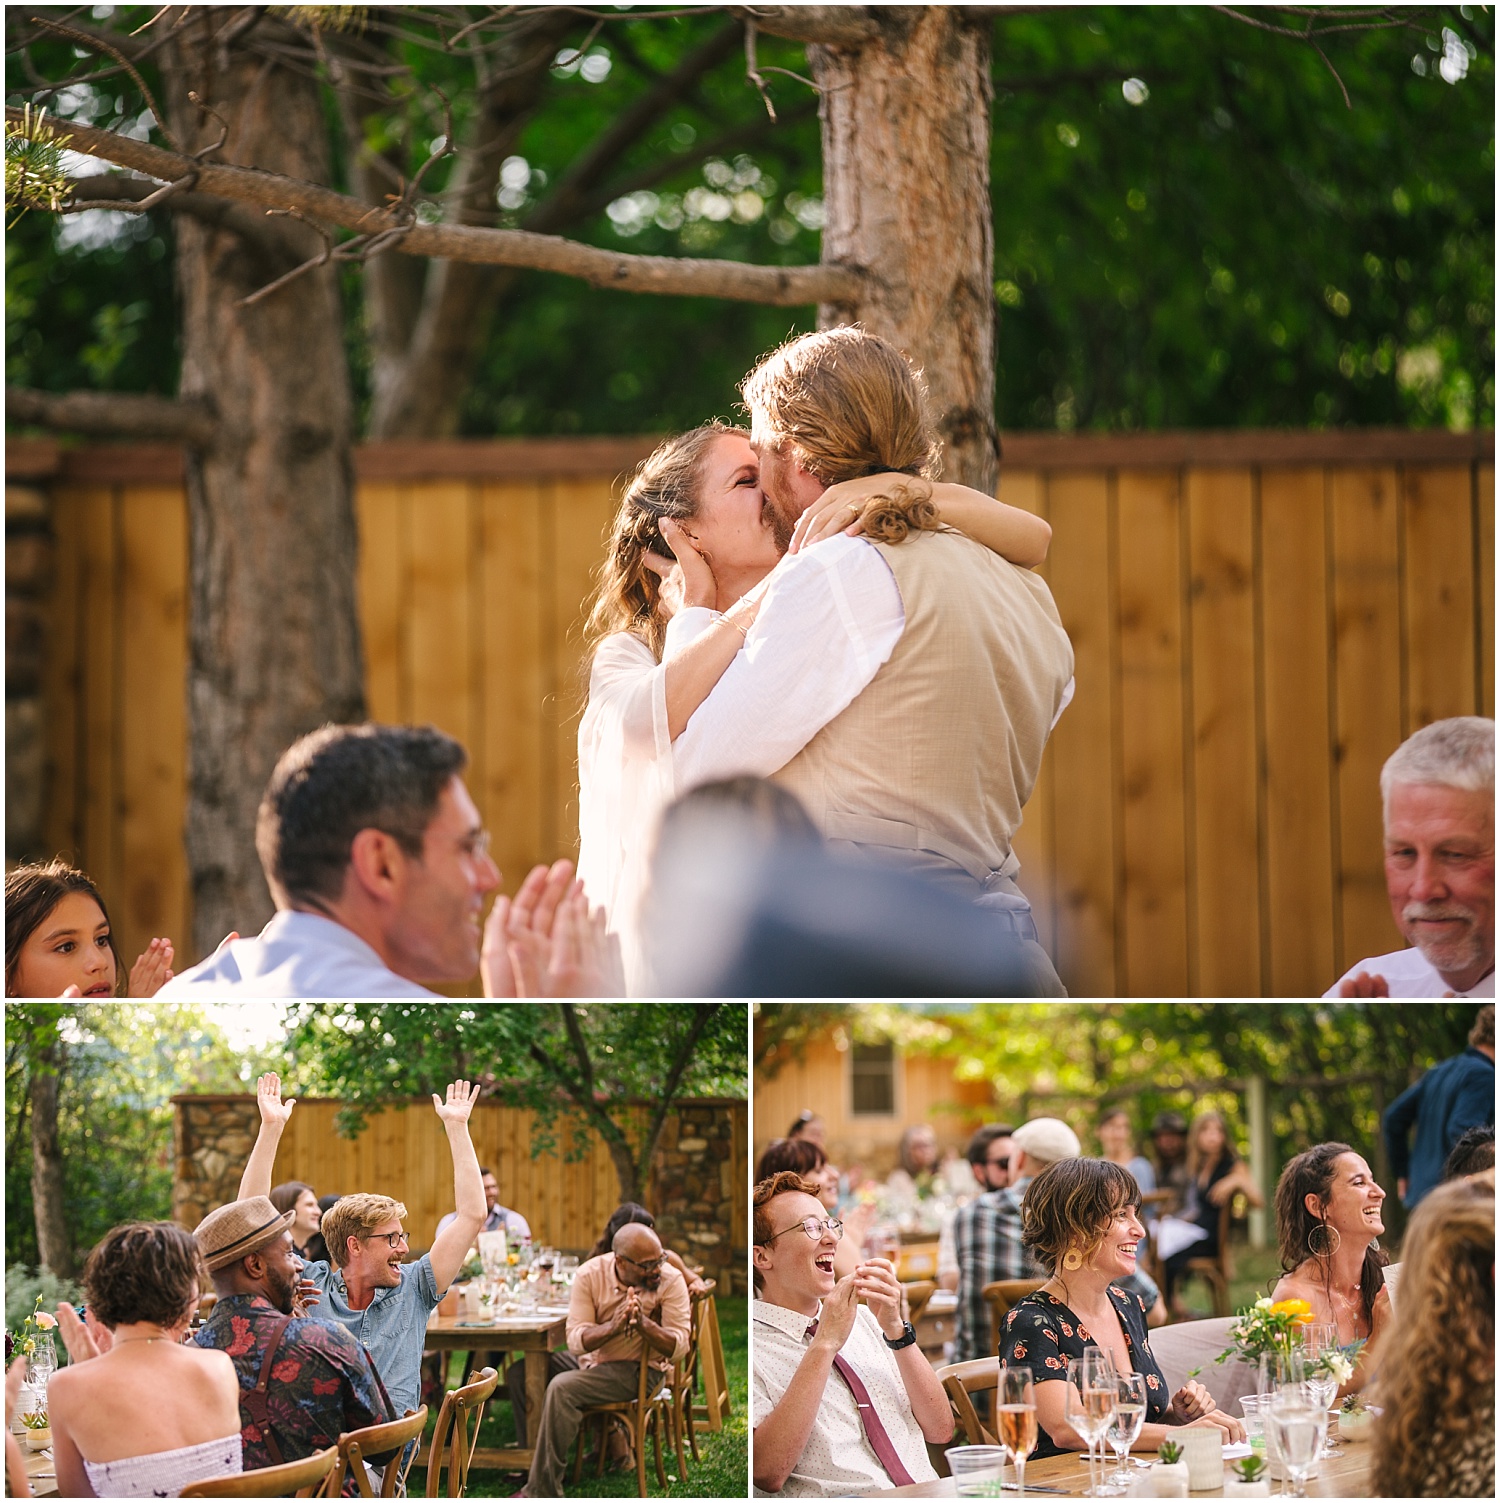 Toasts to the bride and groom at Lone Hawk Farm wedding reception